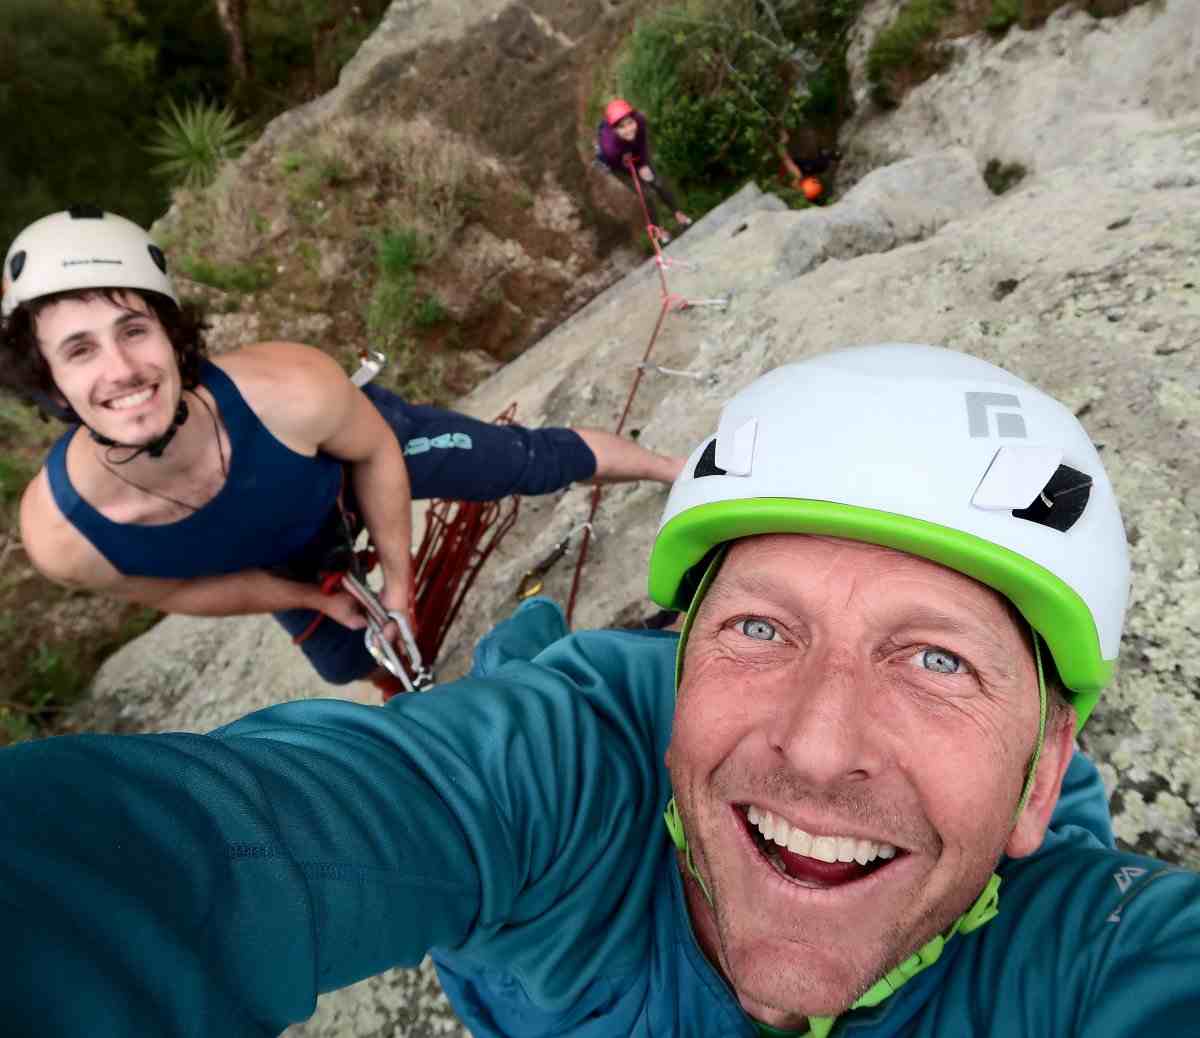 Close up selfie of smiling climber in white helmet, looking down at his climbing partners.